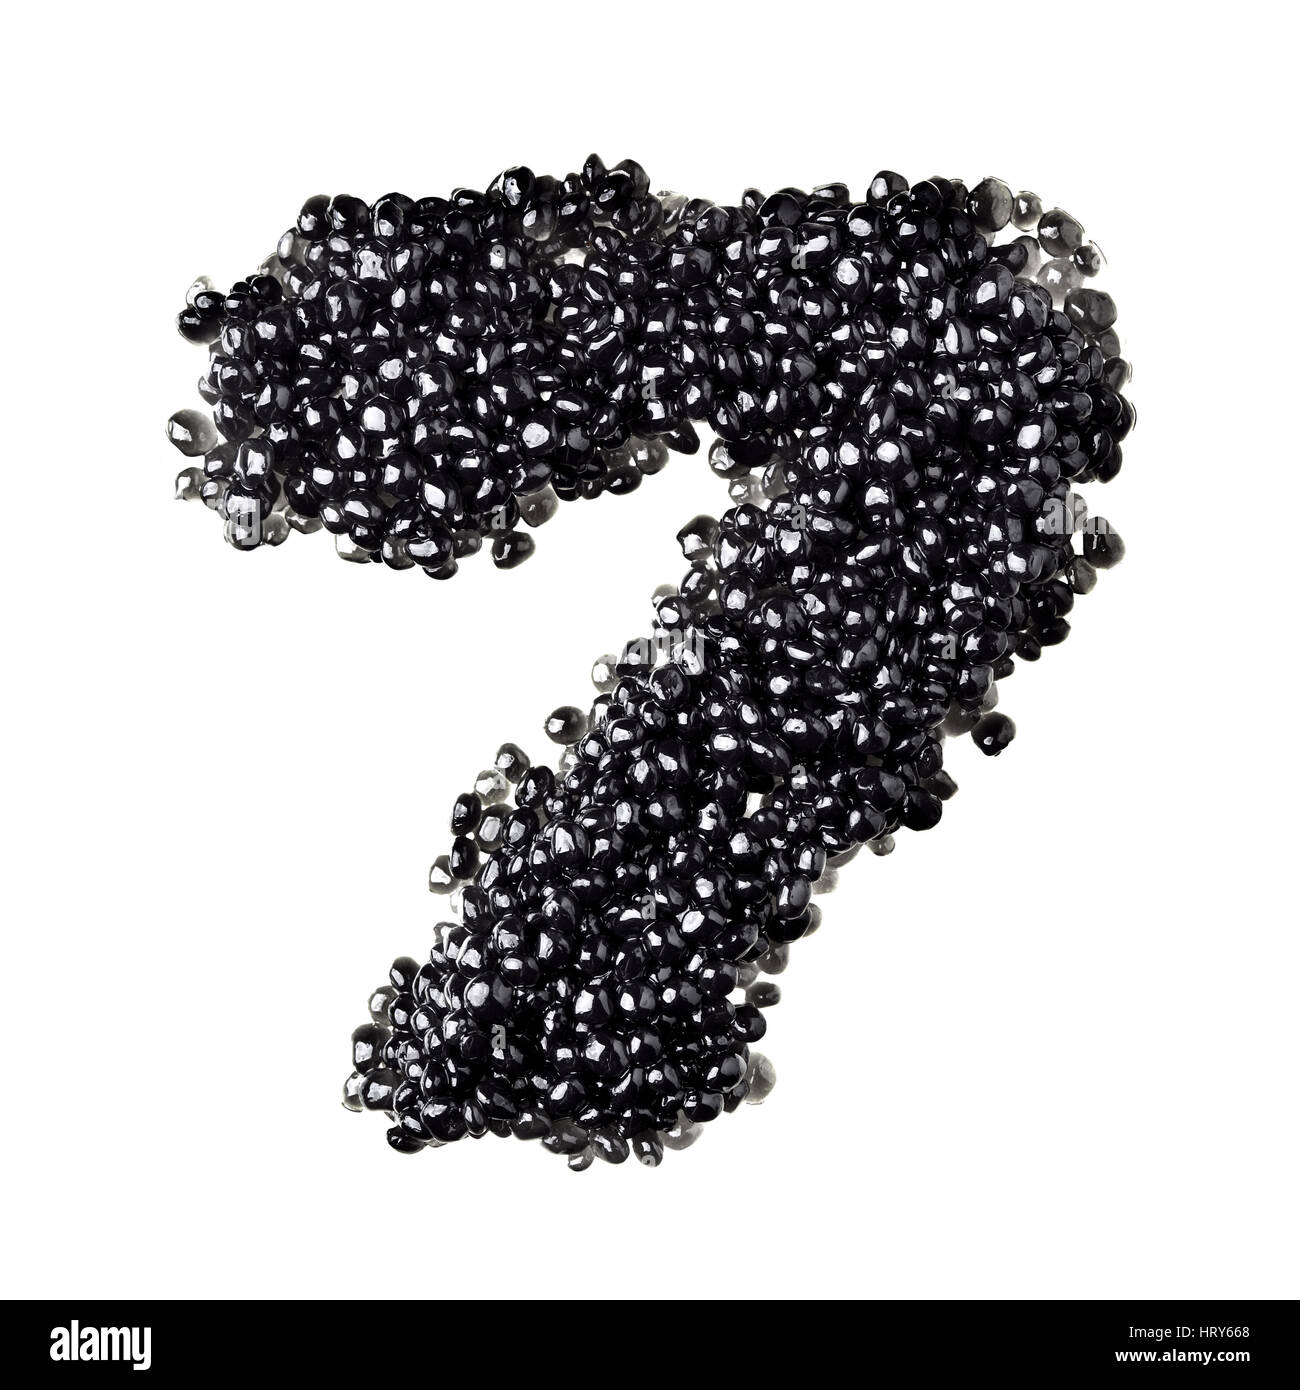 Seven - Numbers made from black caviar Stock Photo